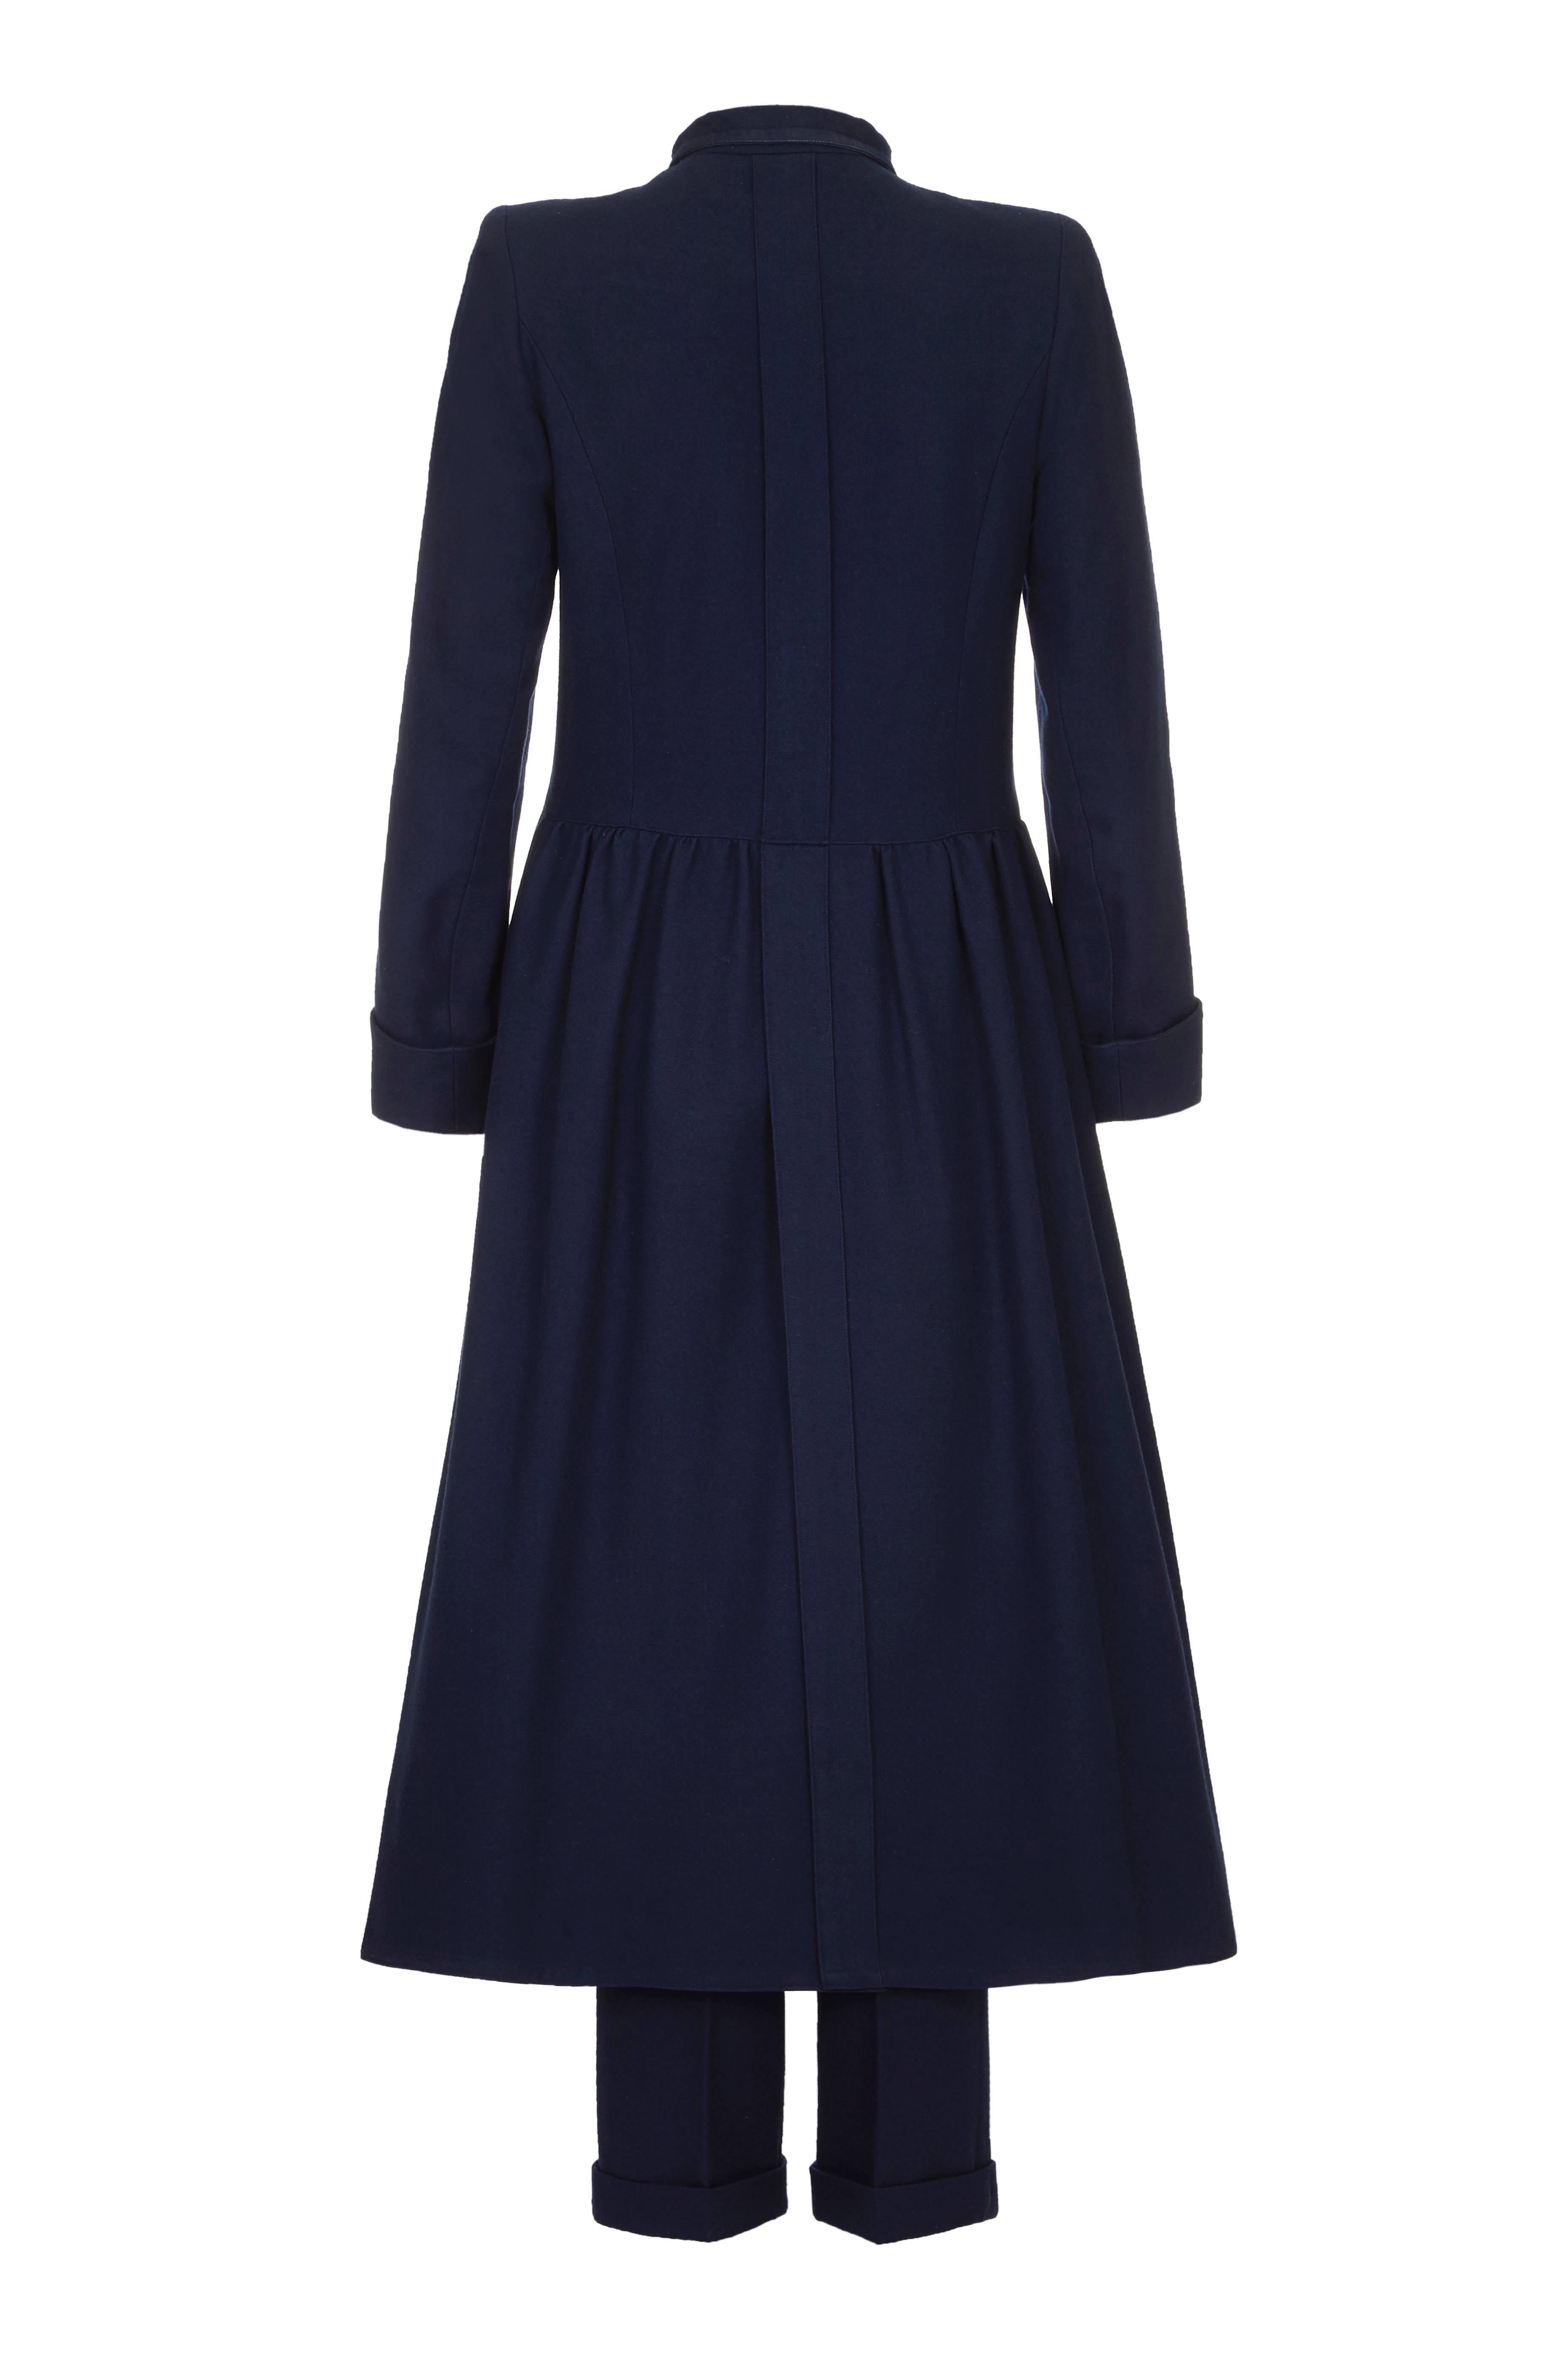 Fantastic vintage Chloe navy wool dress coat dating from 1979.  This military style piece fastens at the front with silver buttons and has two patch breast pockets.  There is an open vent to the back of the skirt, which overlaps from the waist to